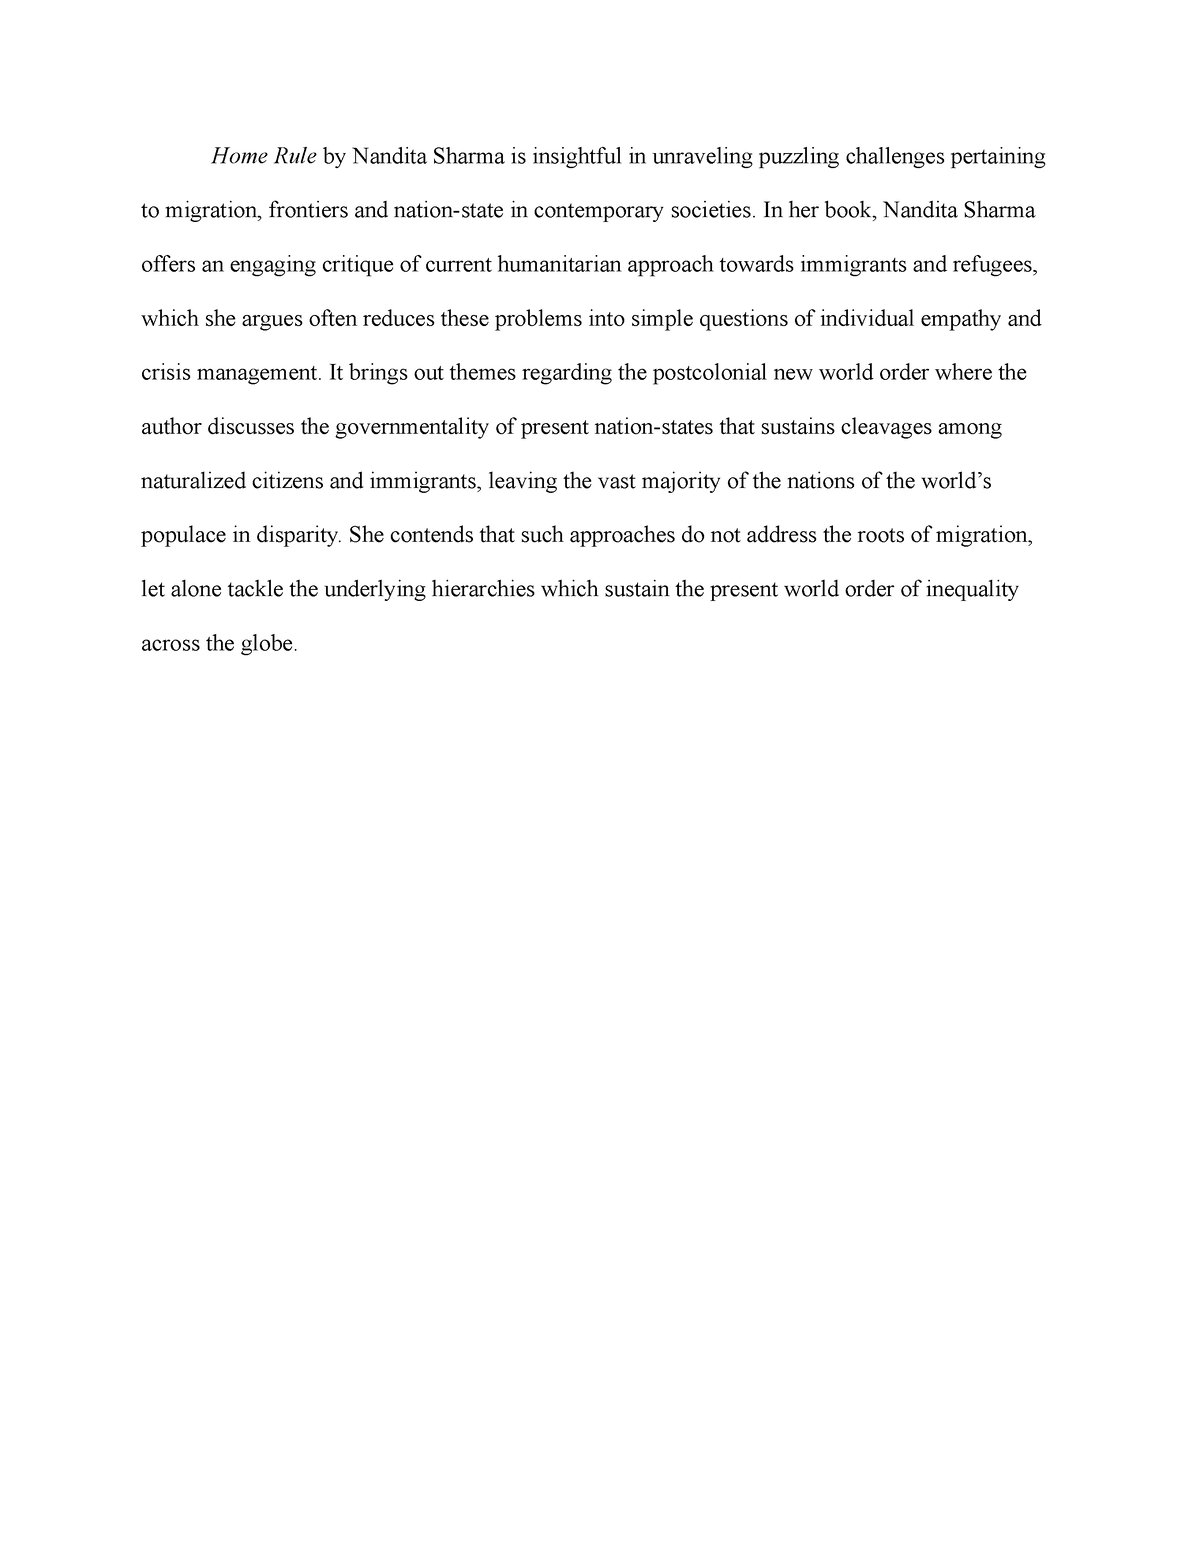 essay on home rule